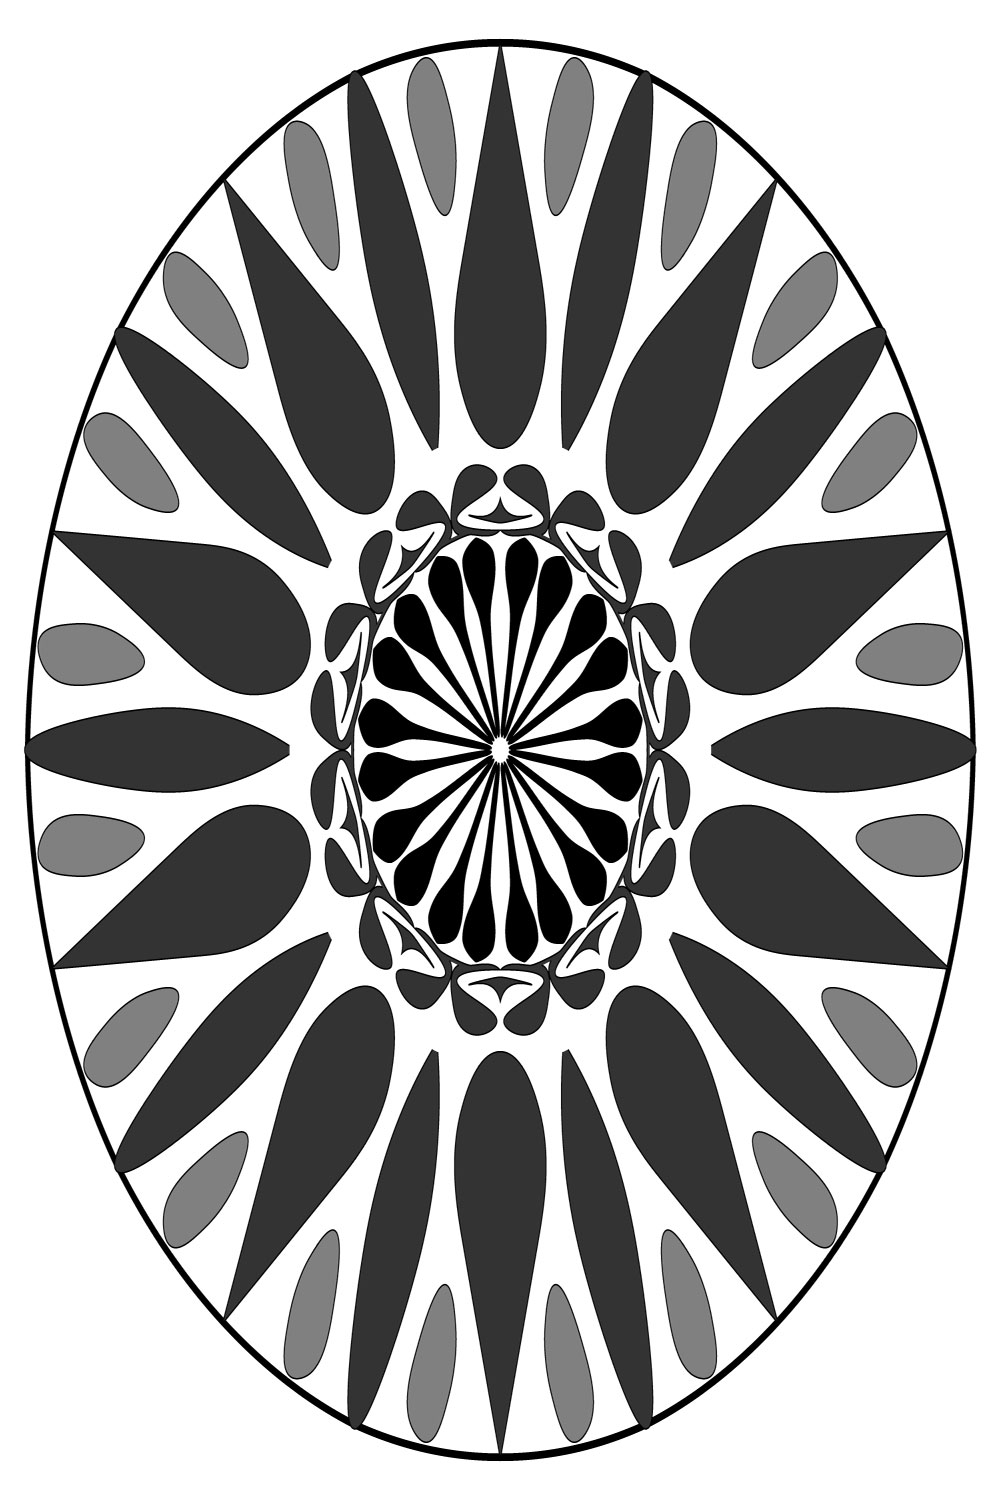 Mandala-Art-with-long-petales-in-black-and-white pinterest preview image.